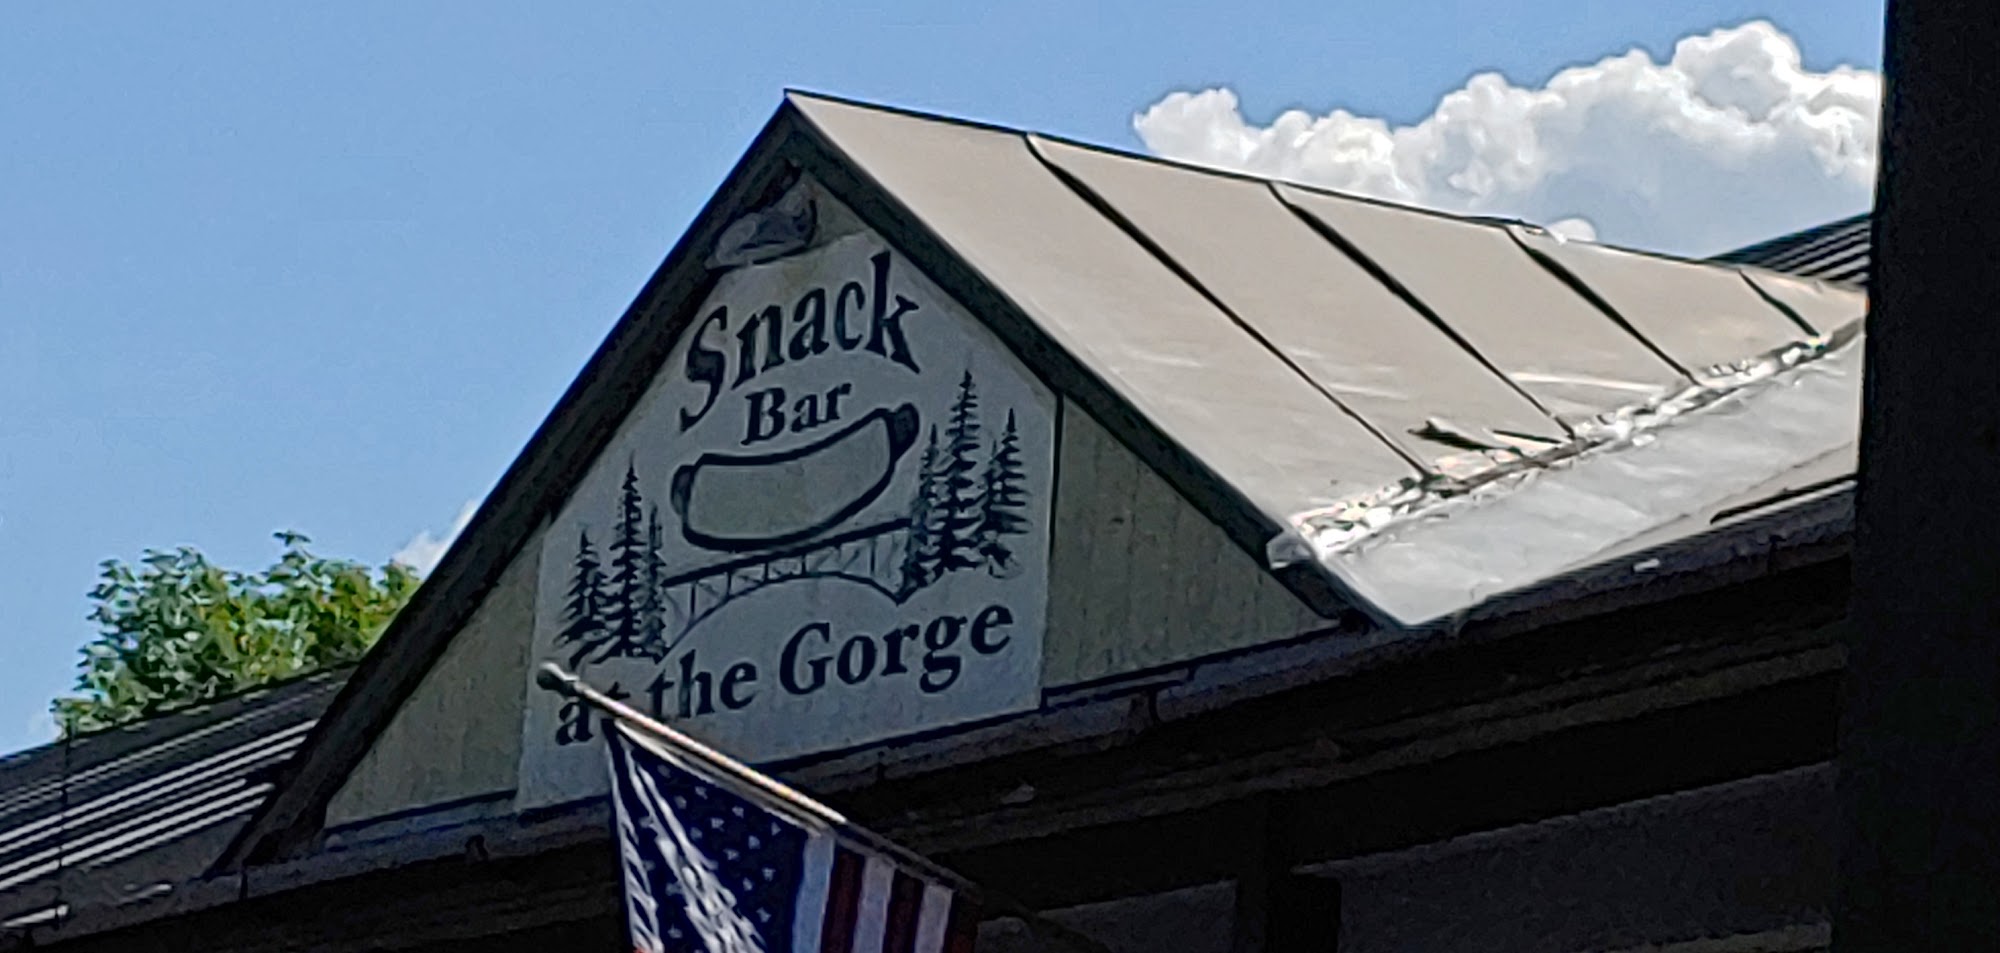 Snack Bar at the Gorge